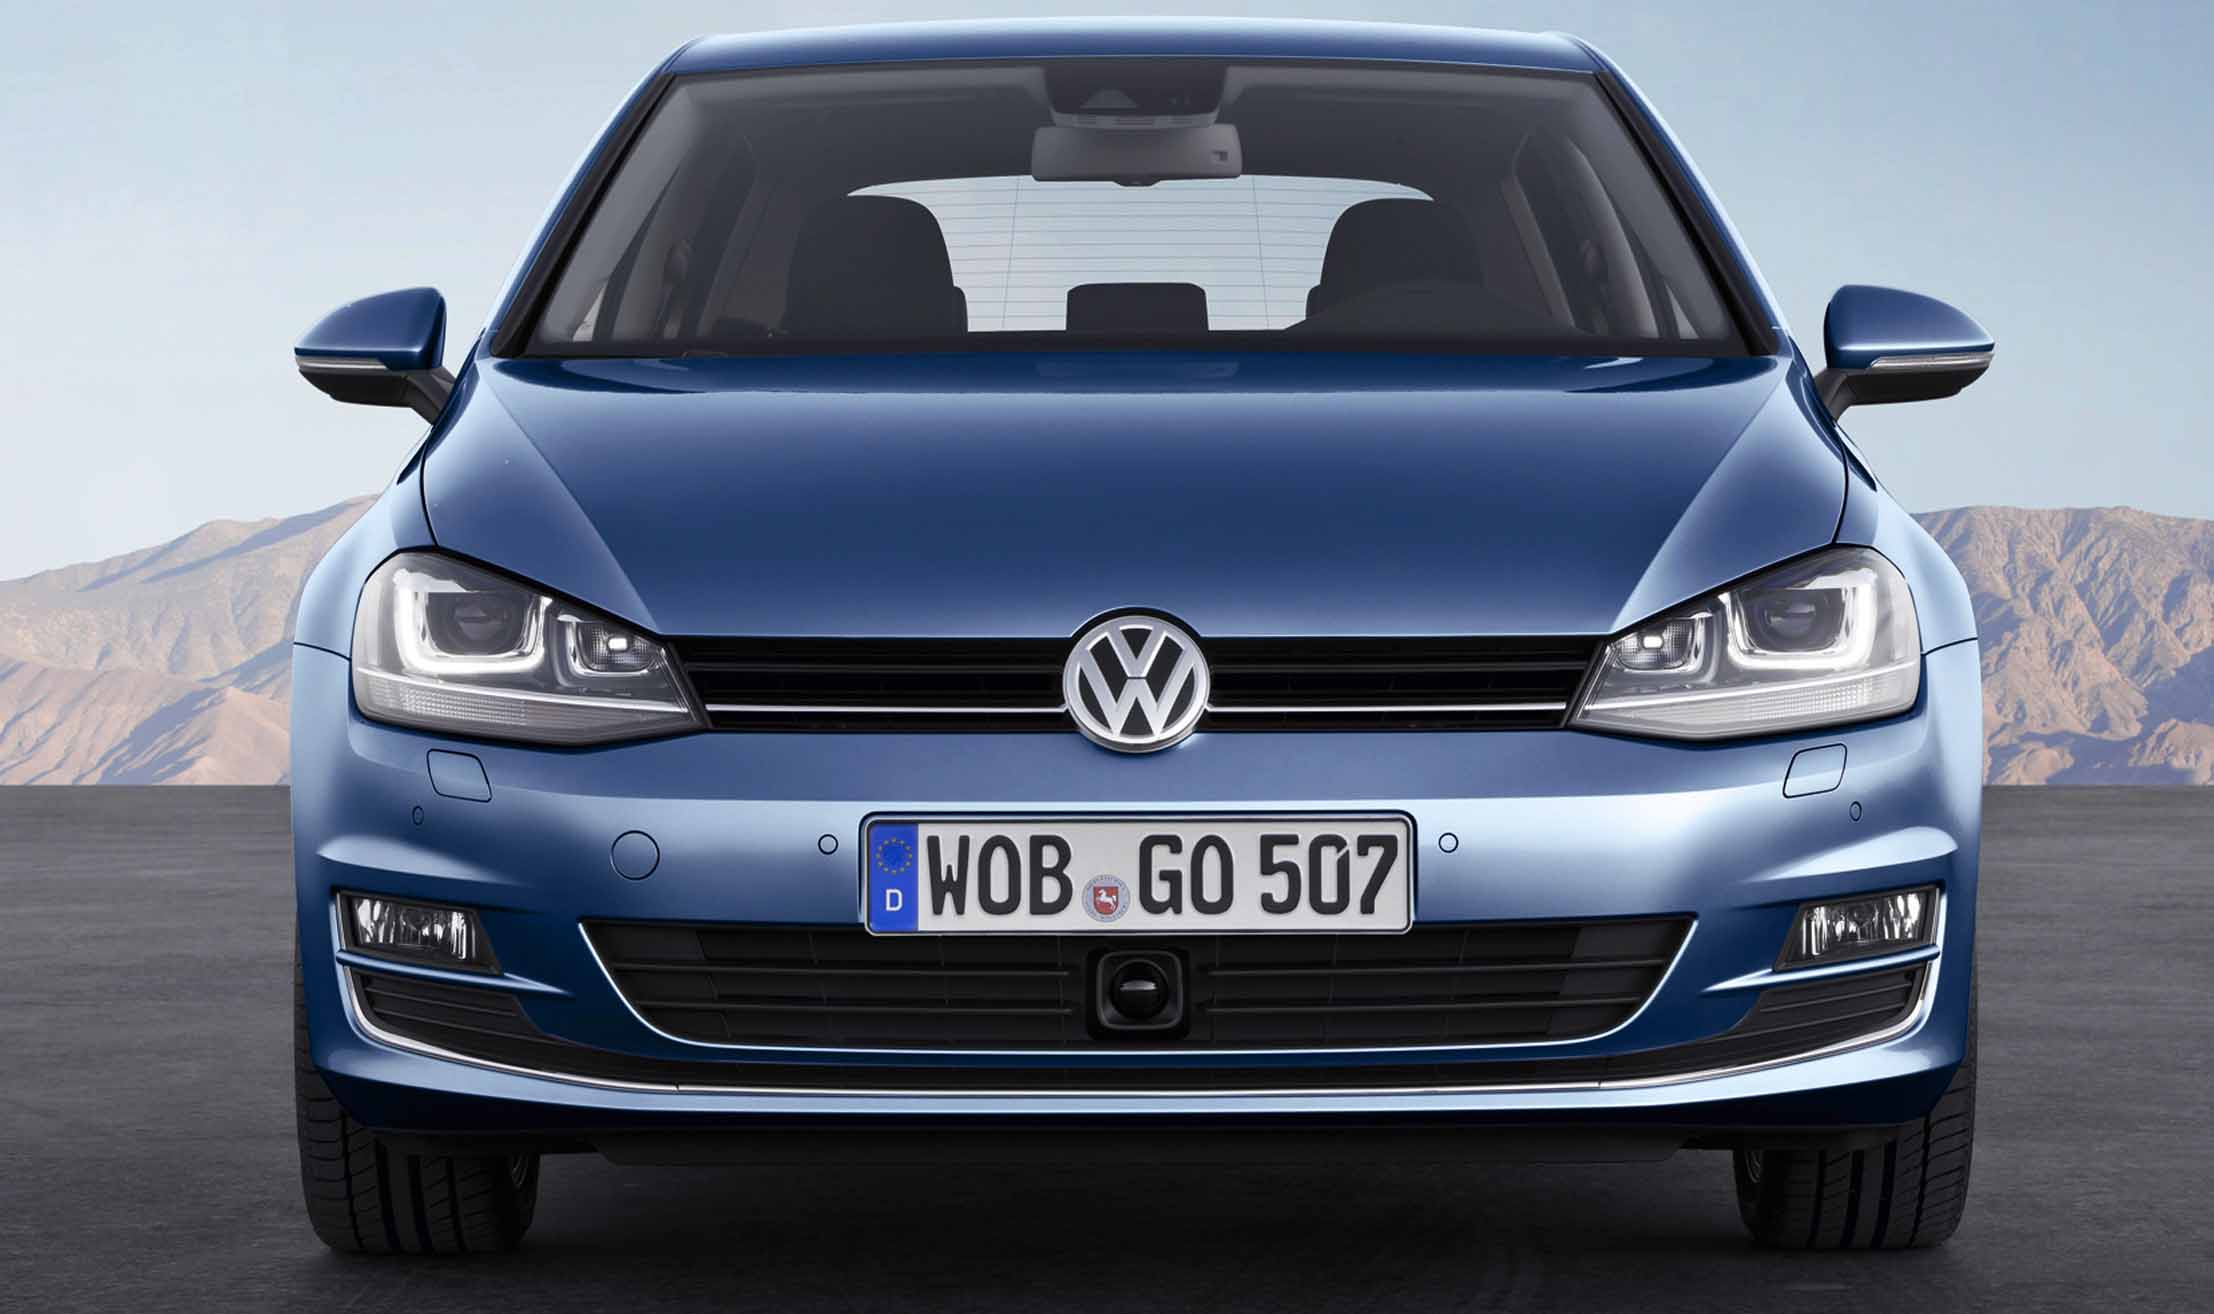 Volkswagen-Golf-BlueMotion-front-view-economical-cars